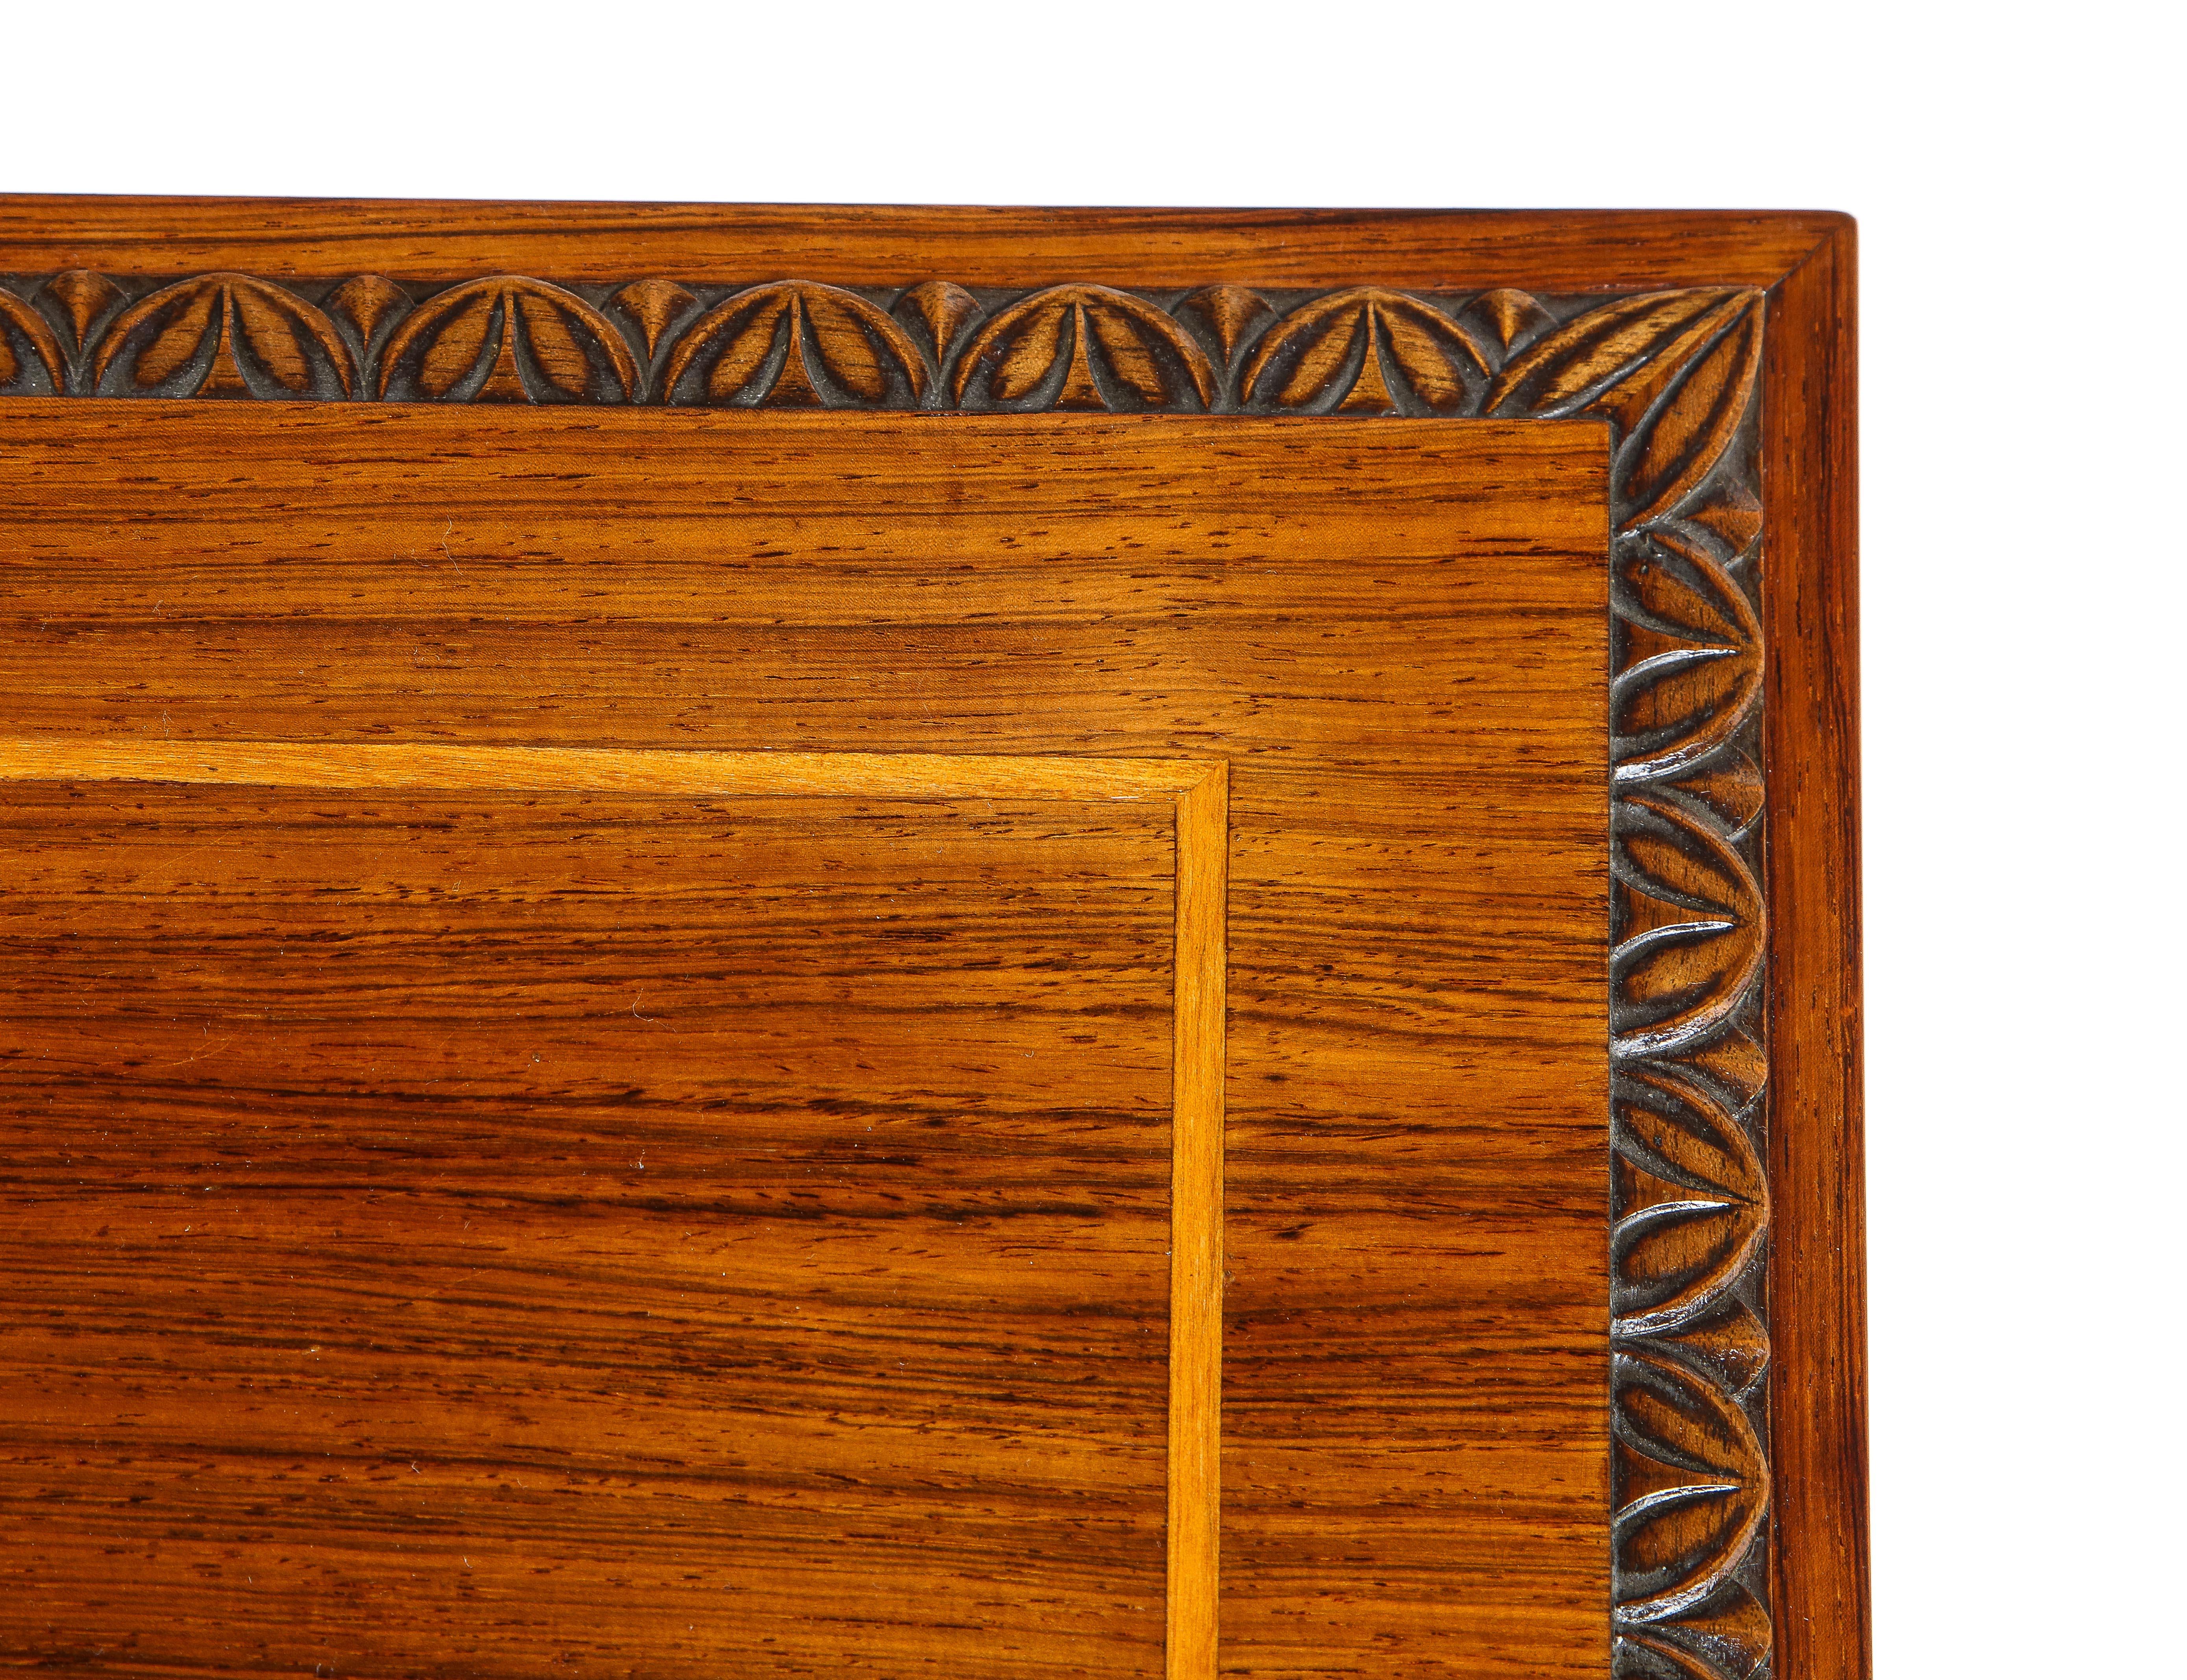 Swedish Grace Fruitwood Inlaid Rosewood Chest of Drawers, Circa 1930-40 7